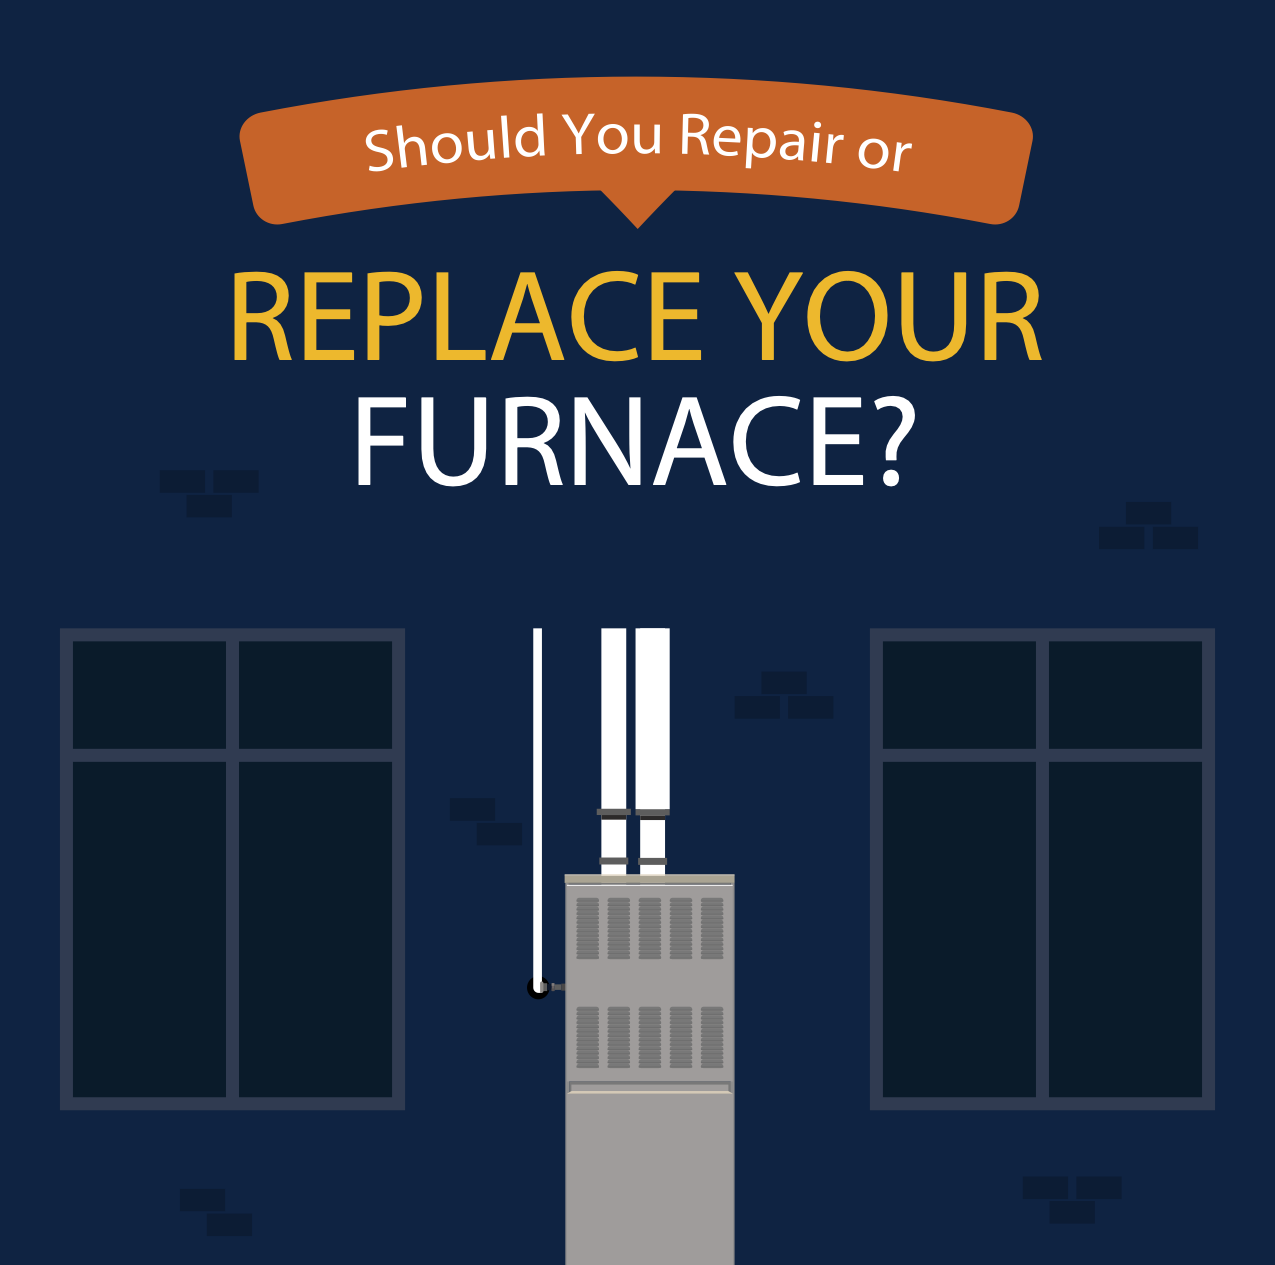 Should You Repair or Replace Your Furnace? infographic thumbnail